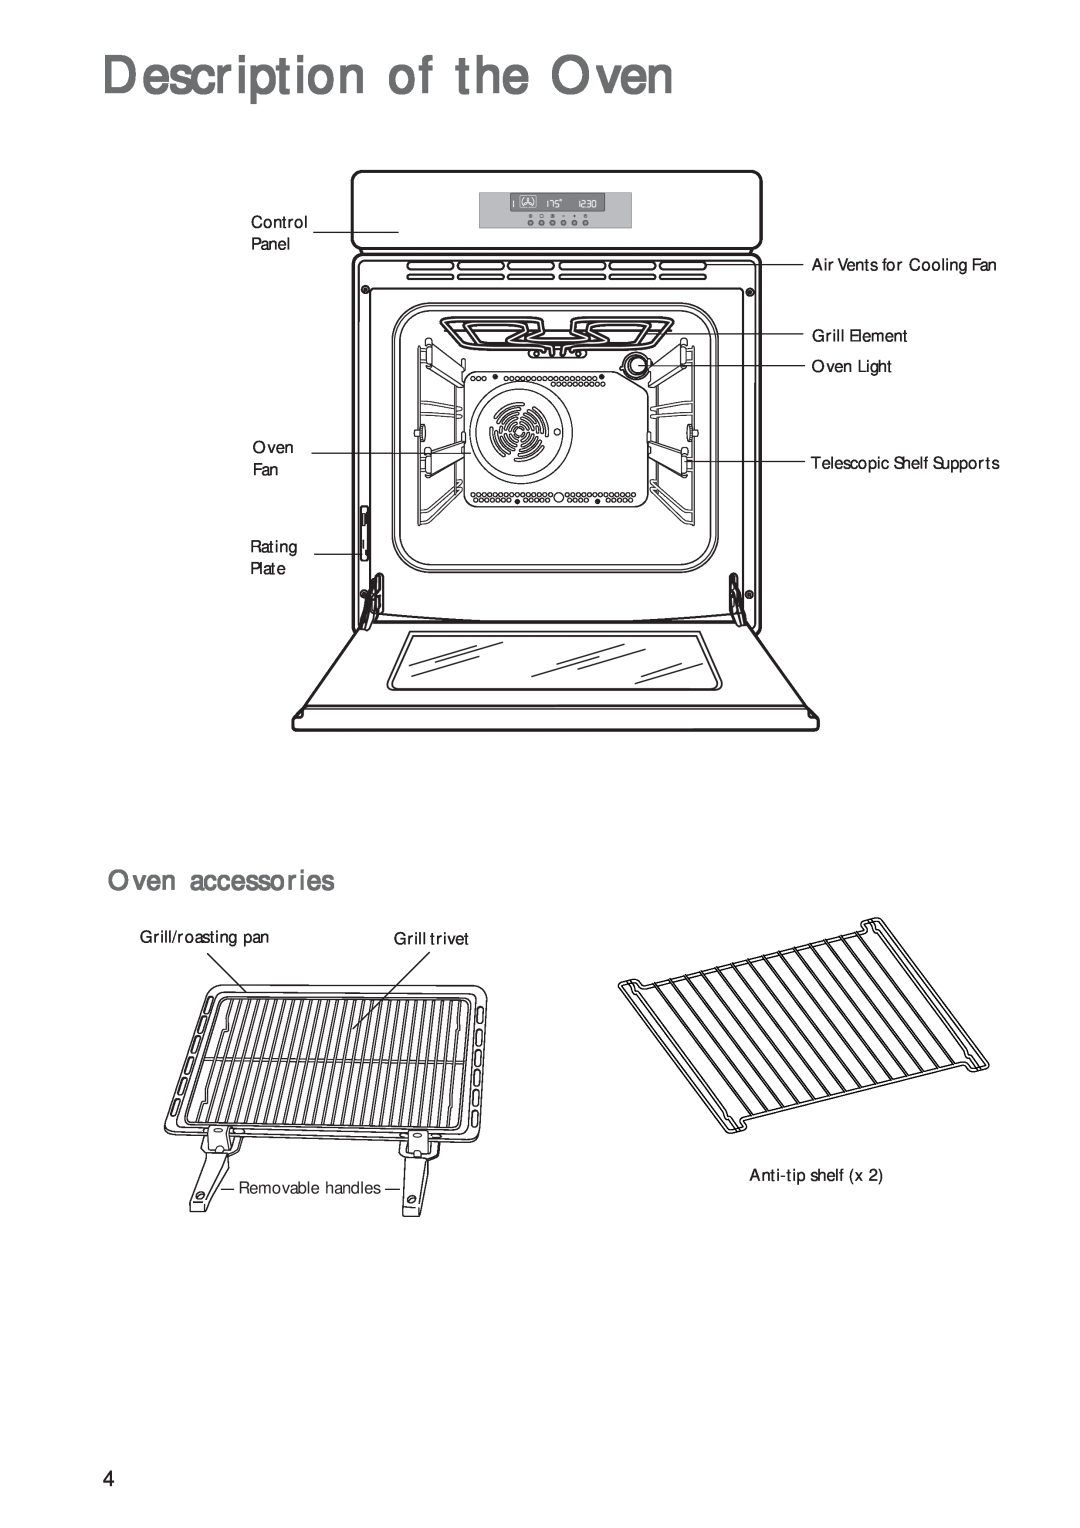 John Lewis JLBIOS602 instruction manual Description of the Oven, Oven accessories, Telescopic Shelf Supports 